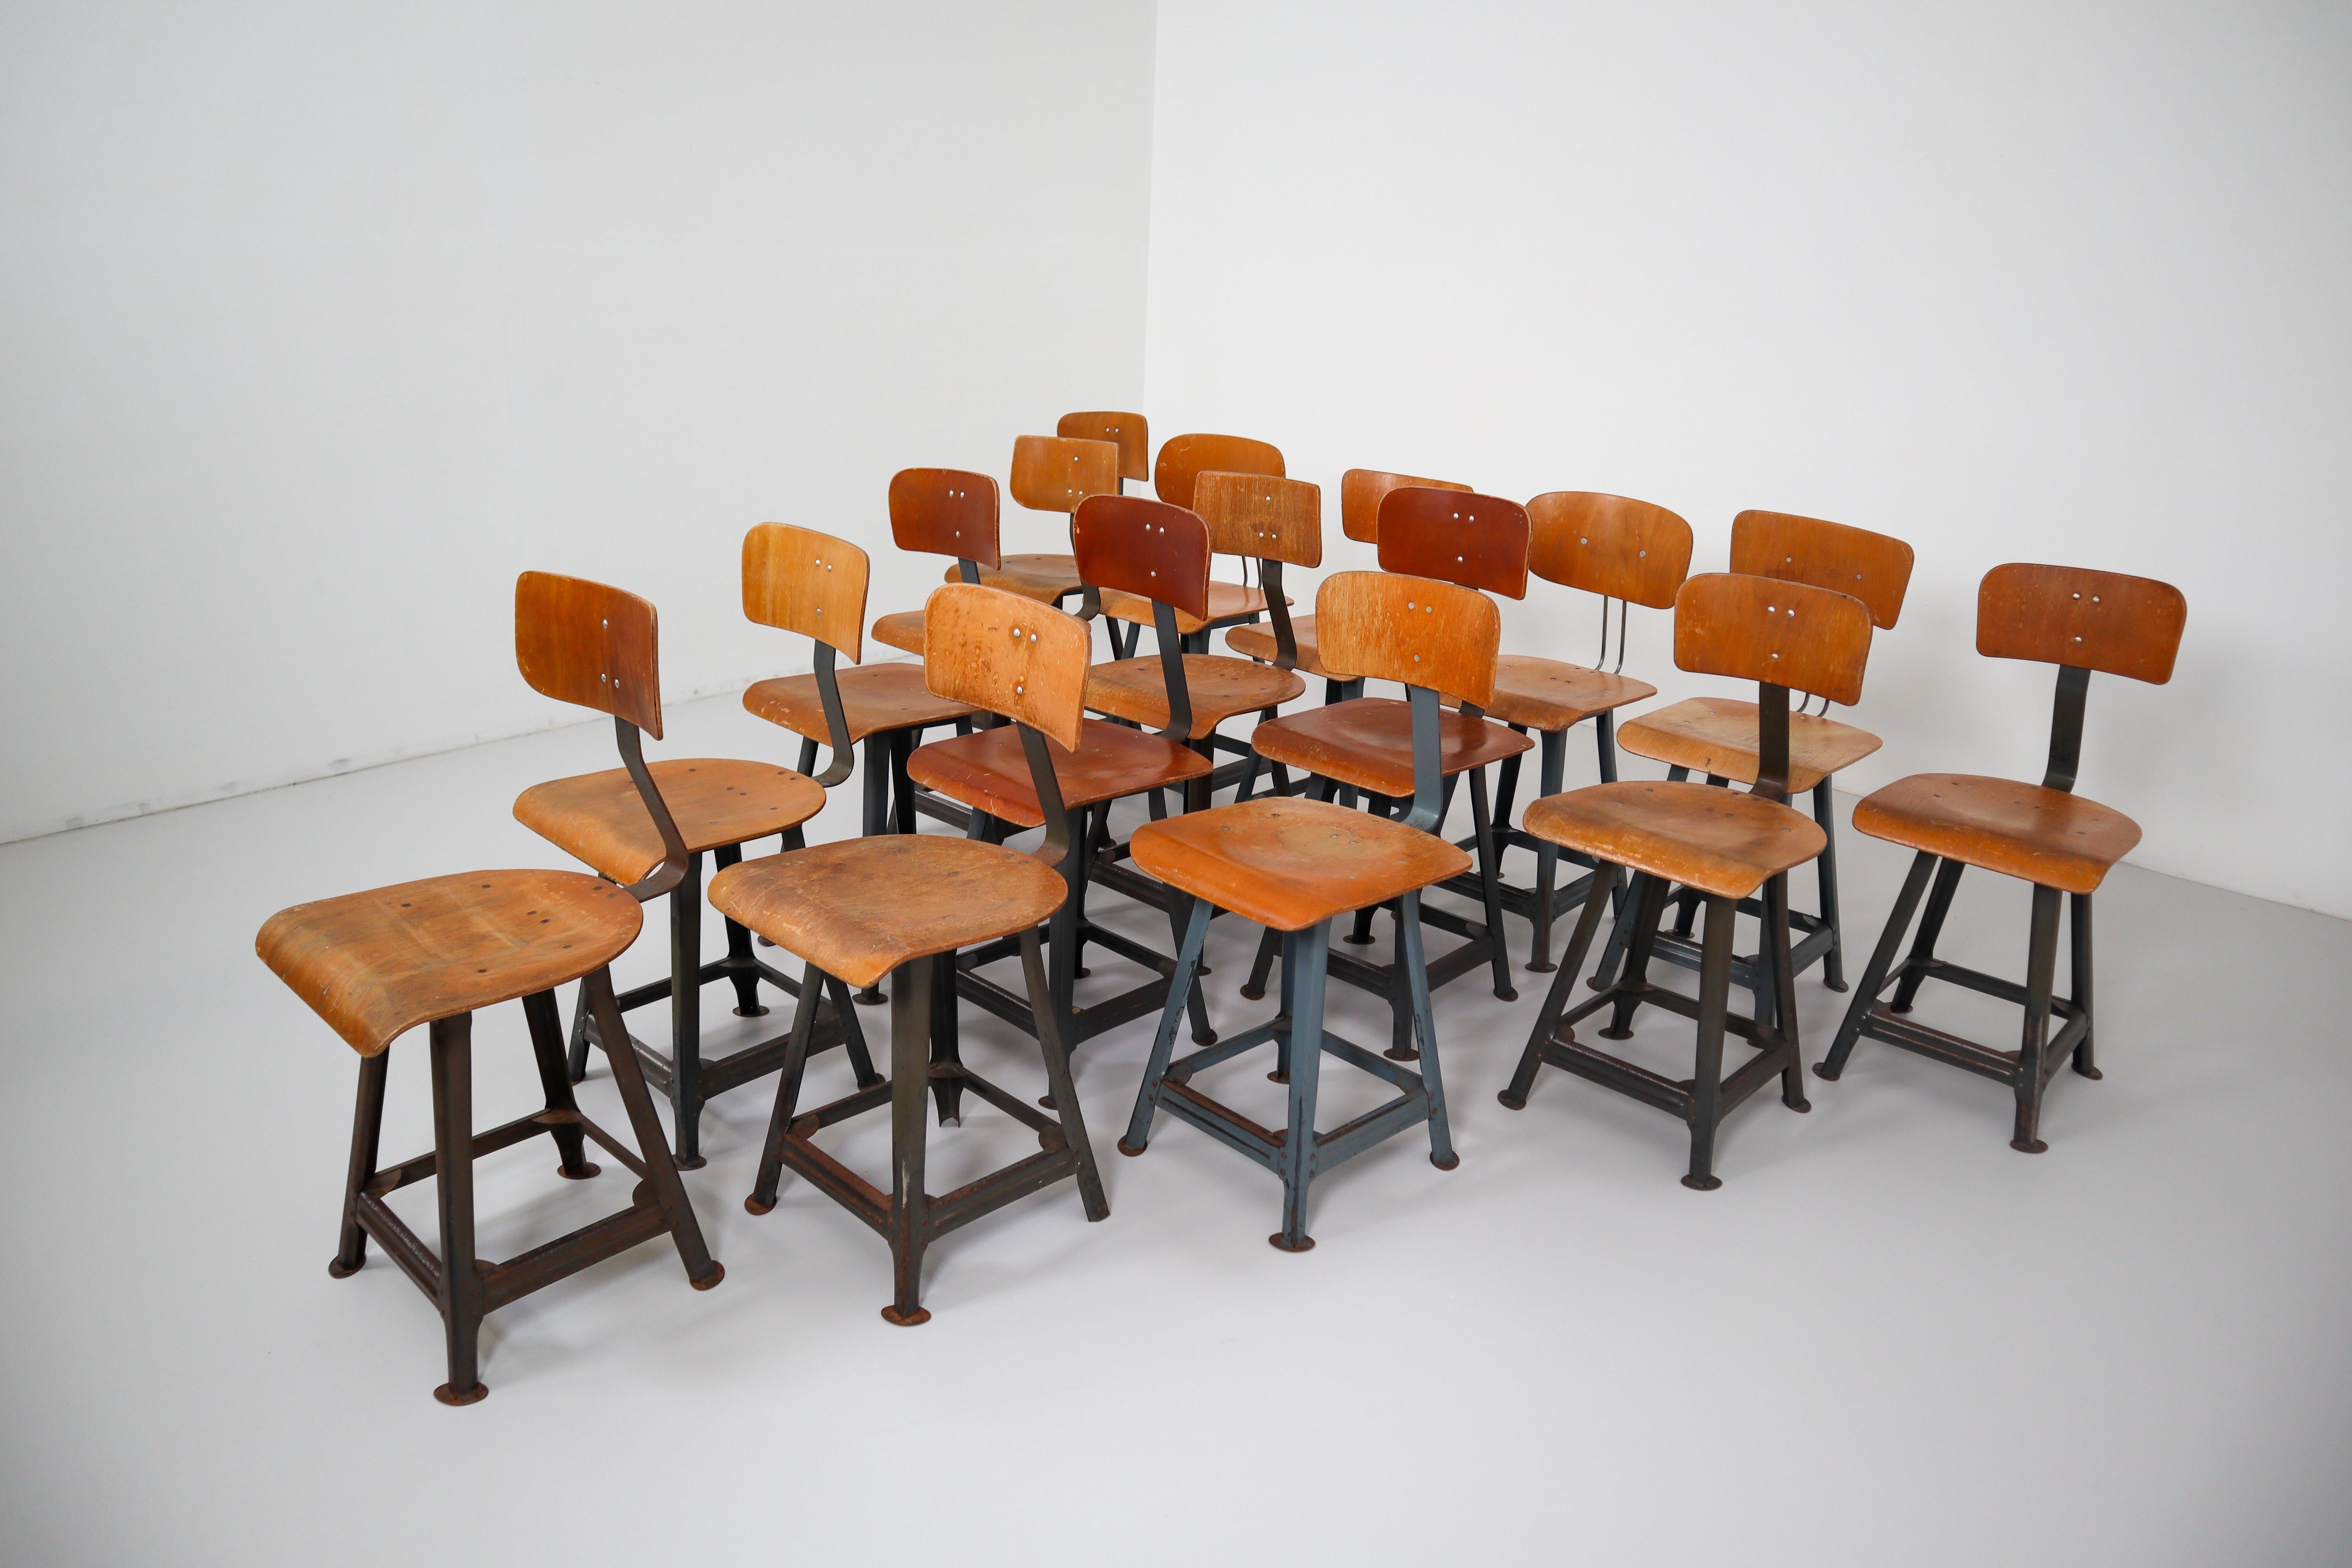 16 Industrial Chairs by Robert Wagner for Bemefa, Rowac, Germany, 1950s 6